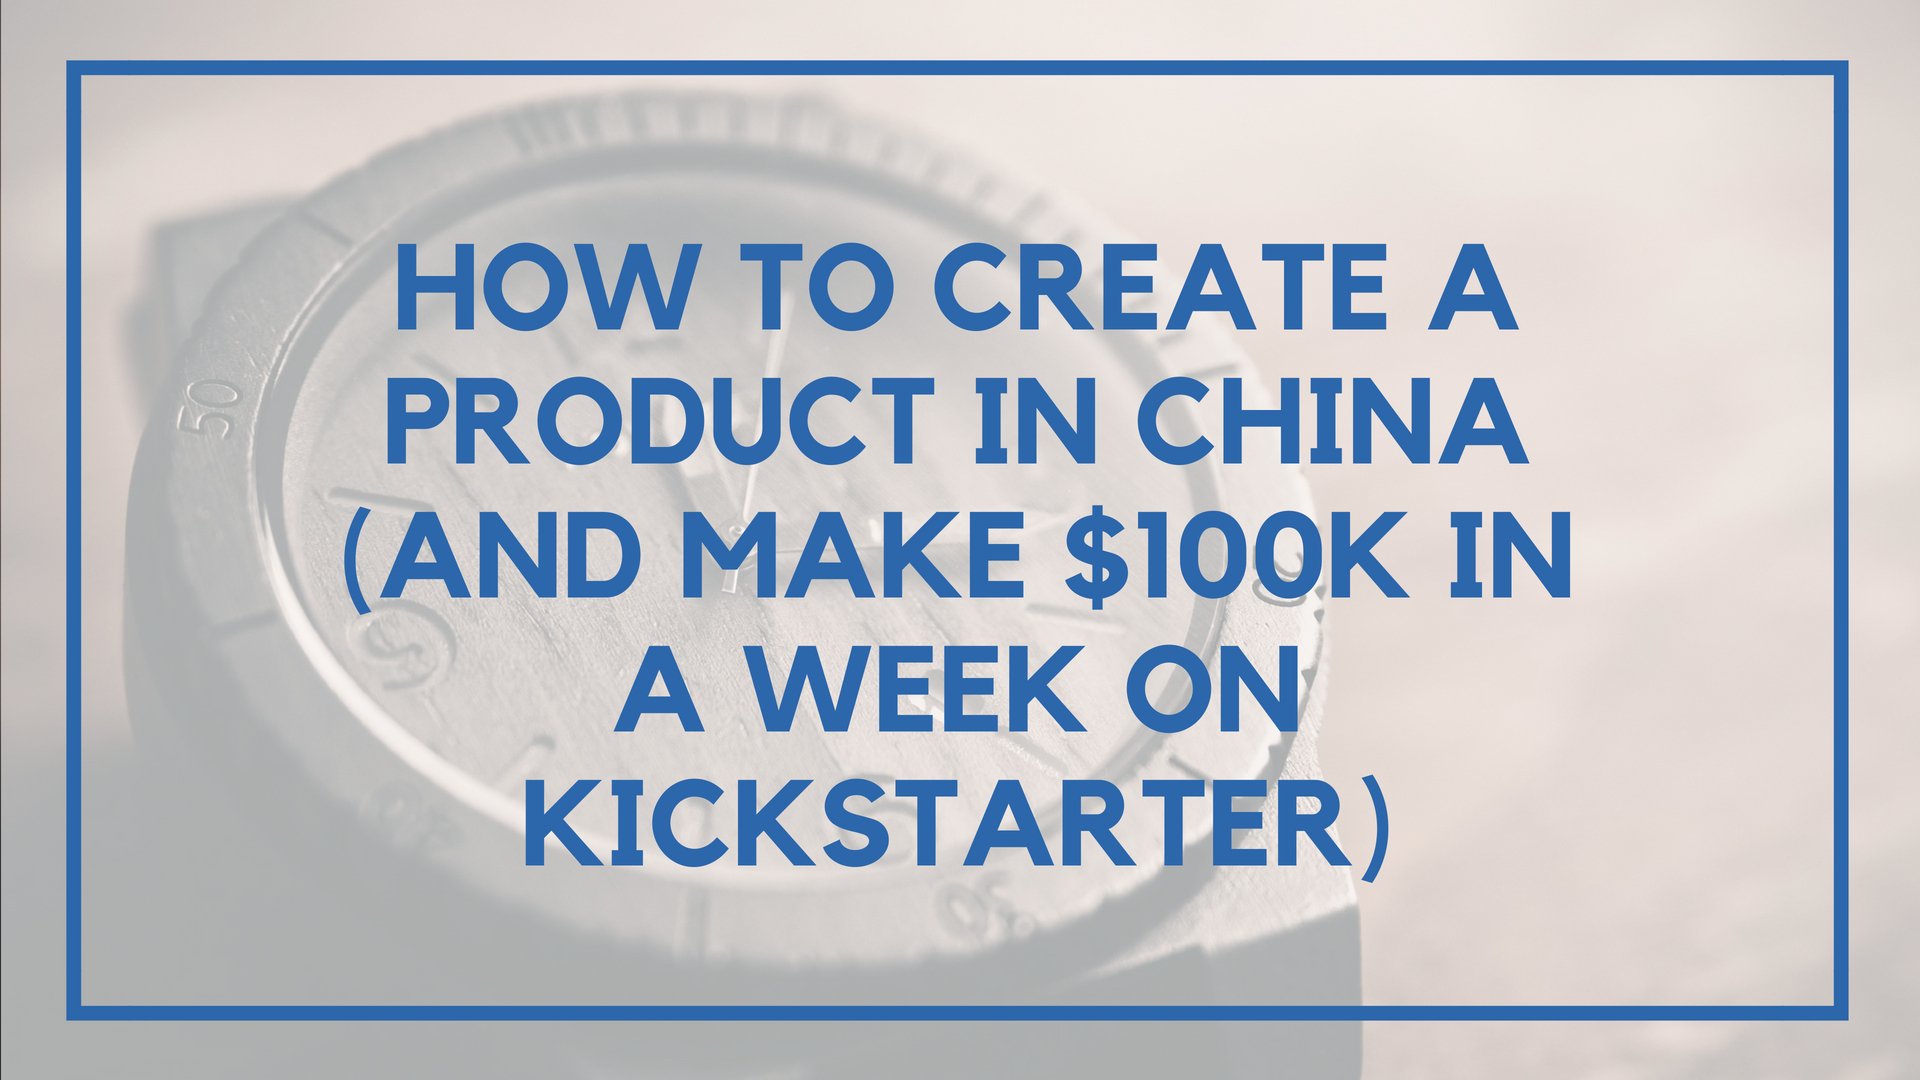 How to Create a Product in China (And Make $100k in a Week on Kickstarter)